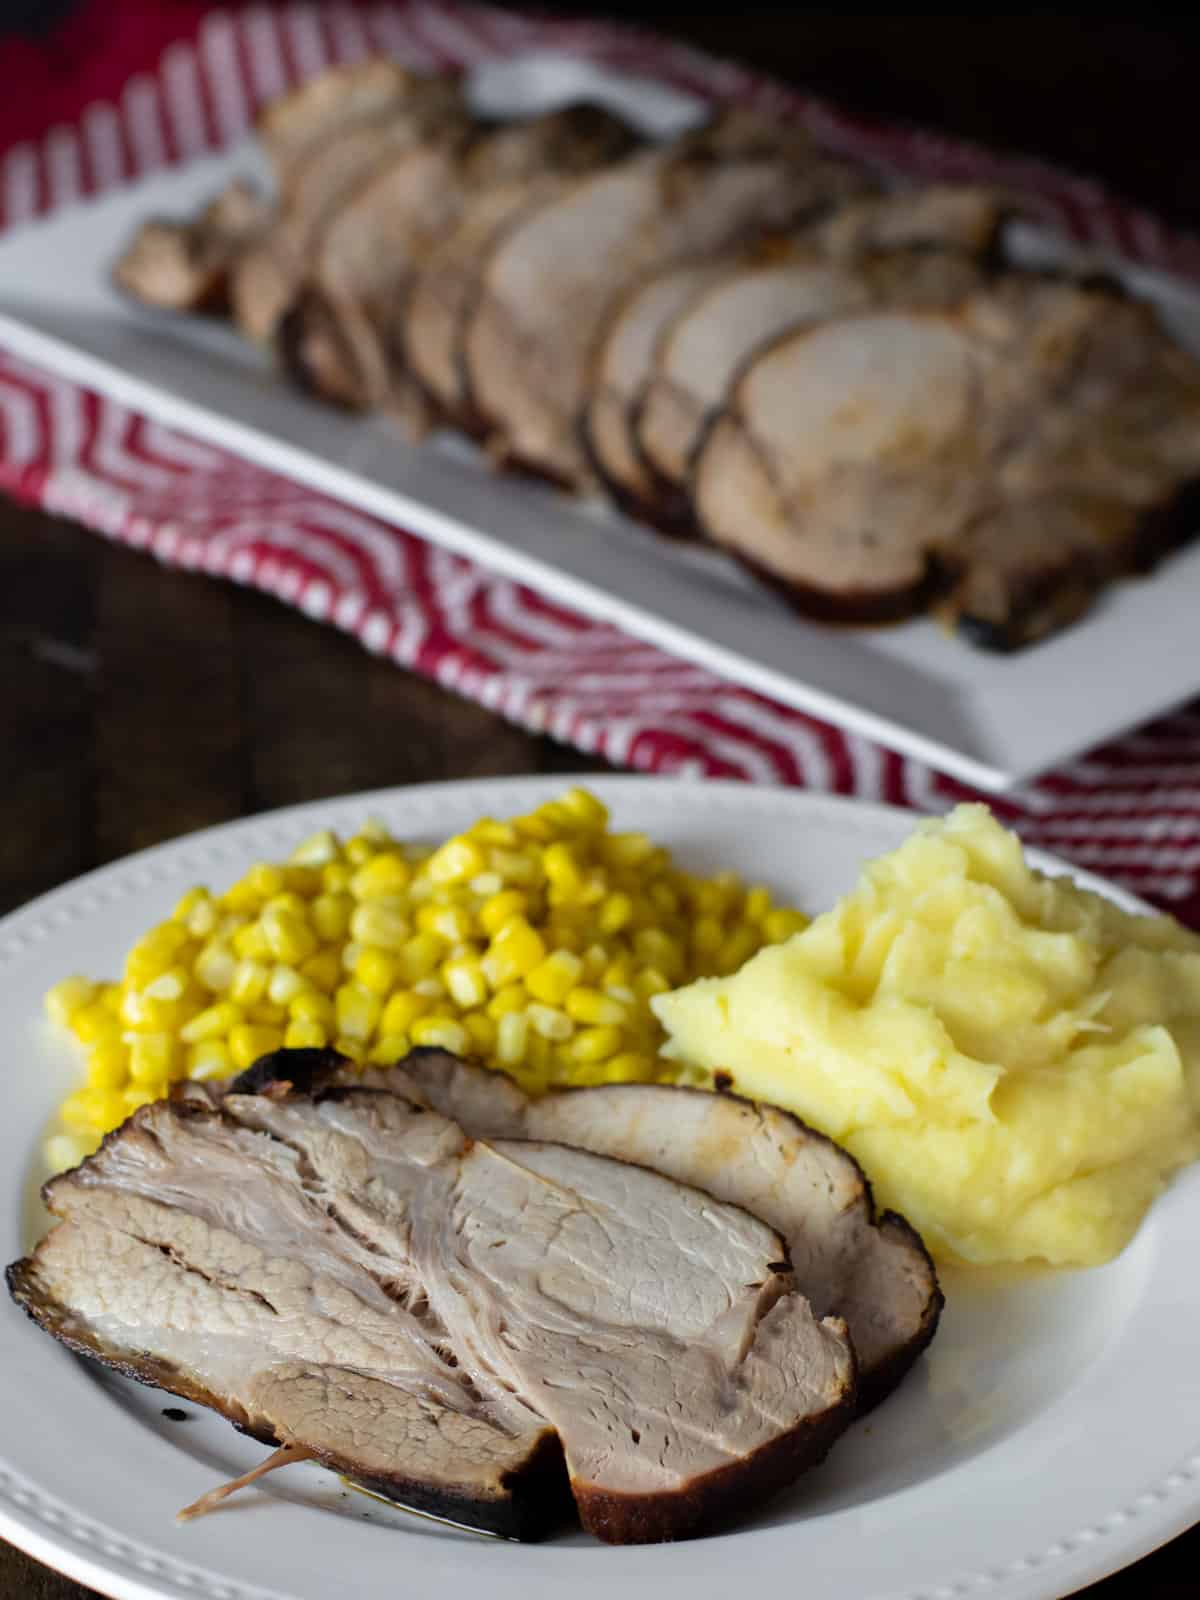 A dinner plate with a slice of pork roast, mashed potatoes and corn.